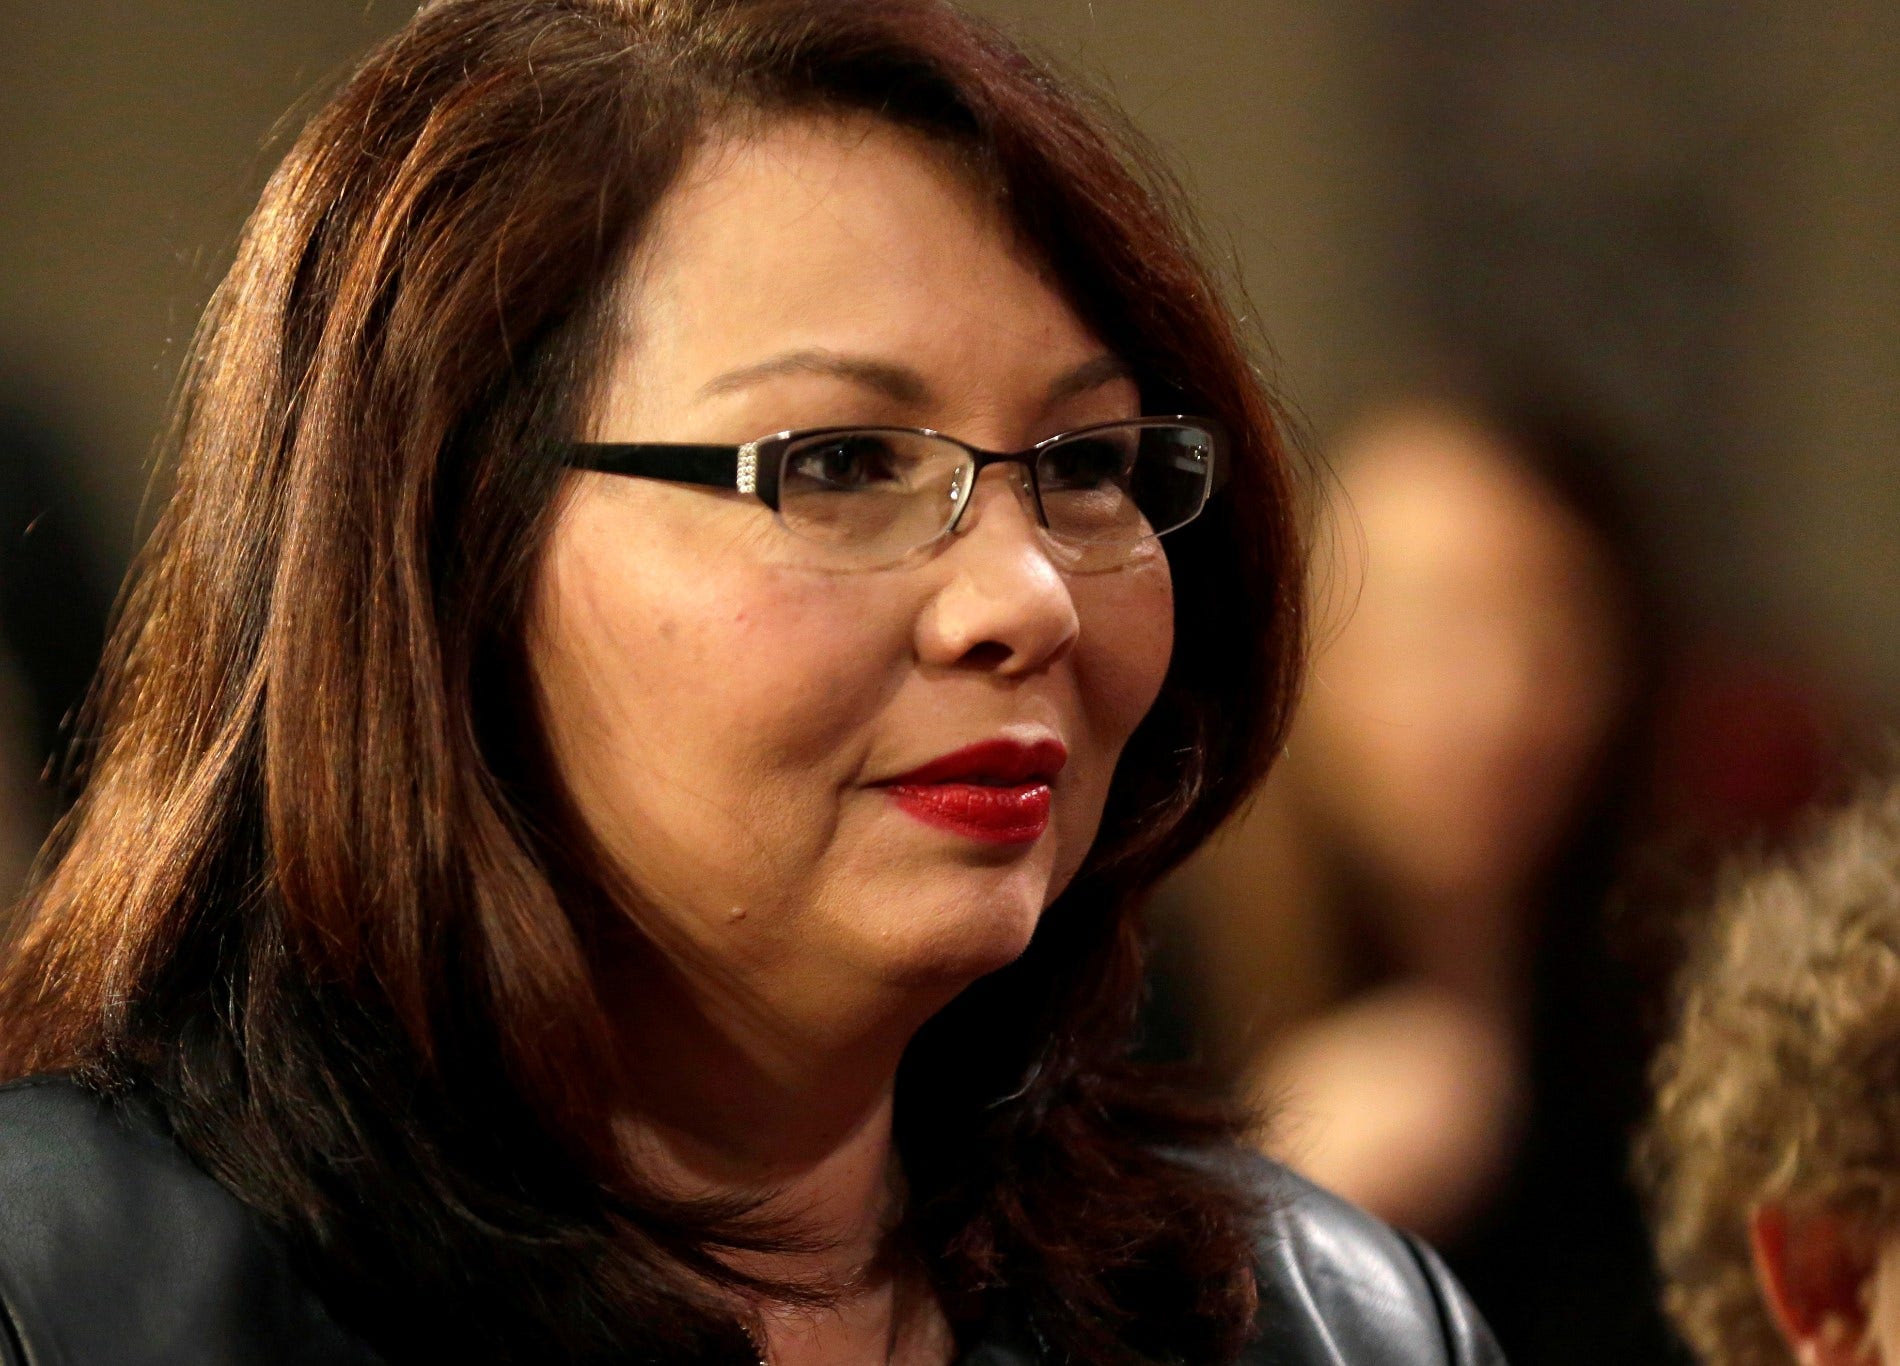 Democrat Tammy Duckworth hasn’t paid property tax on her Illinois home since 2015, report says